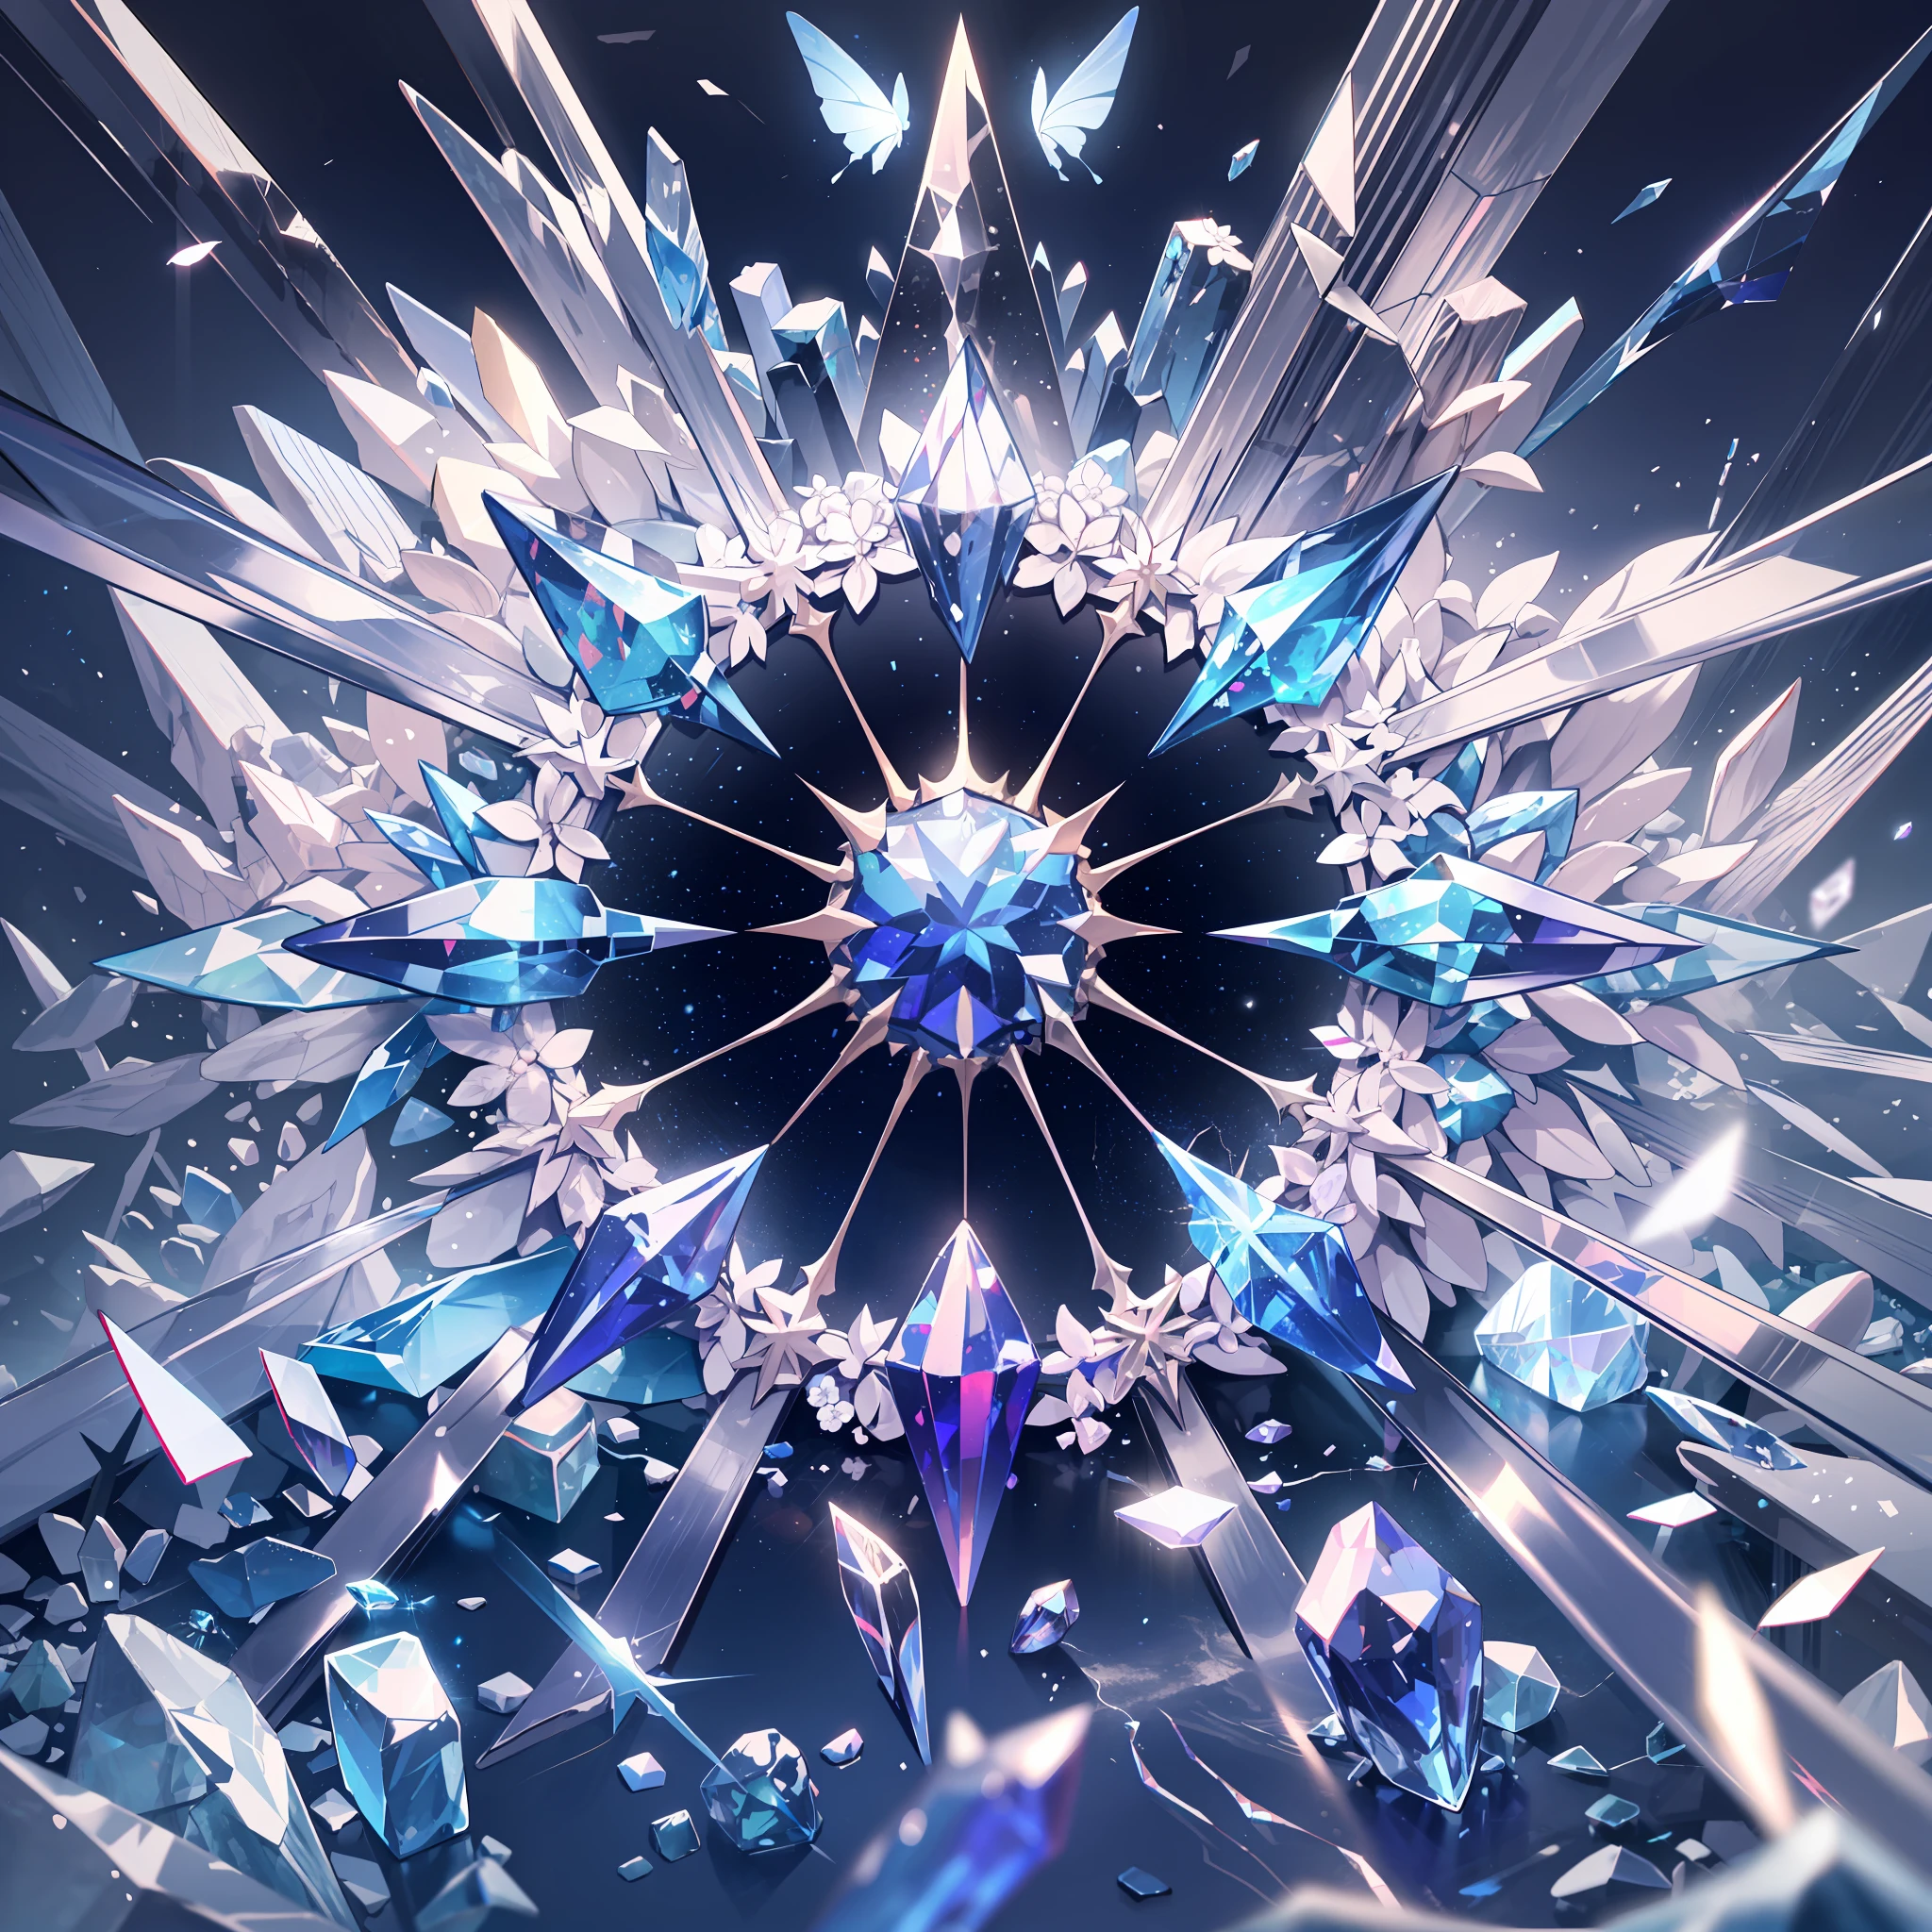 background with glass,crystal,beautiful detail background,{{{white butterfly}}}, diamond world, crystal flower,ice theme, falling ice,white crystal background, nihilism, frustration,glass rain,white ice,no people